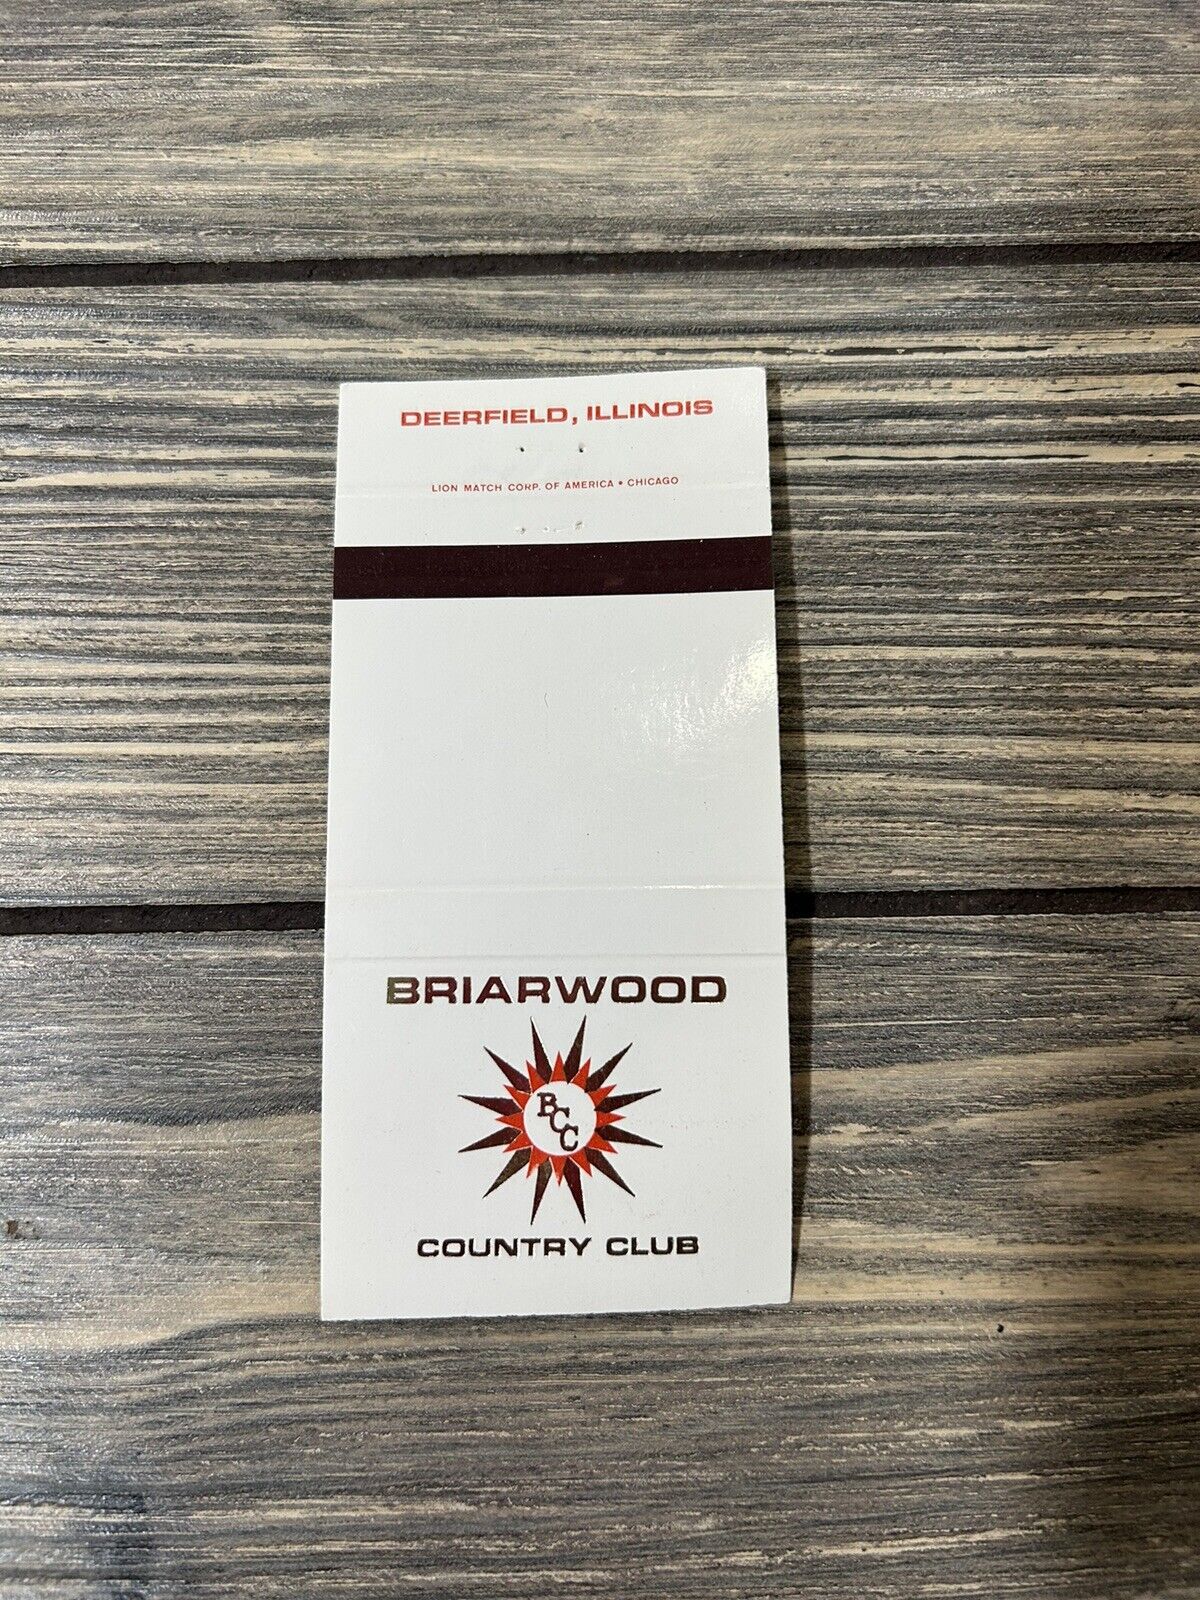 Vintage Briarwood Country Club Deerfield Illinois Matchbook Cover